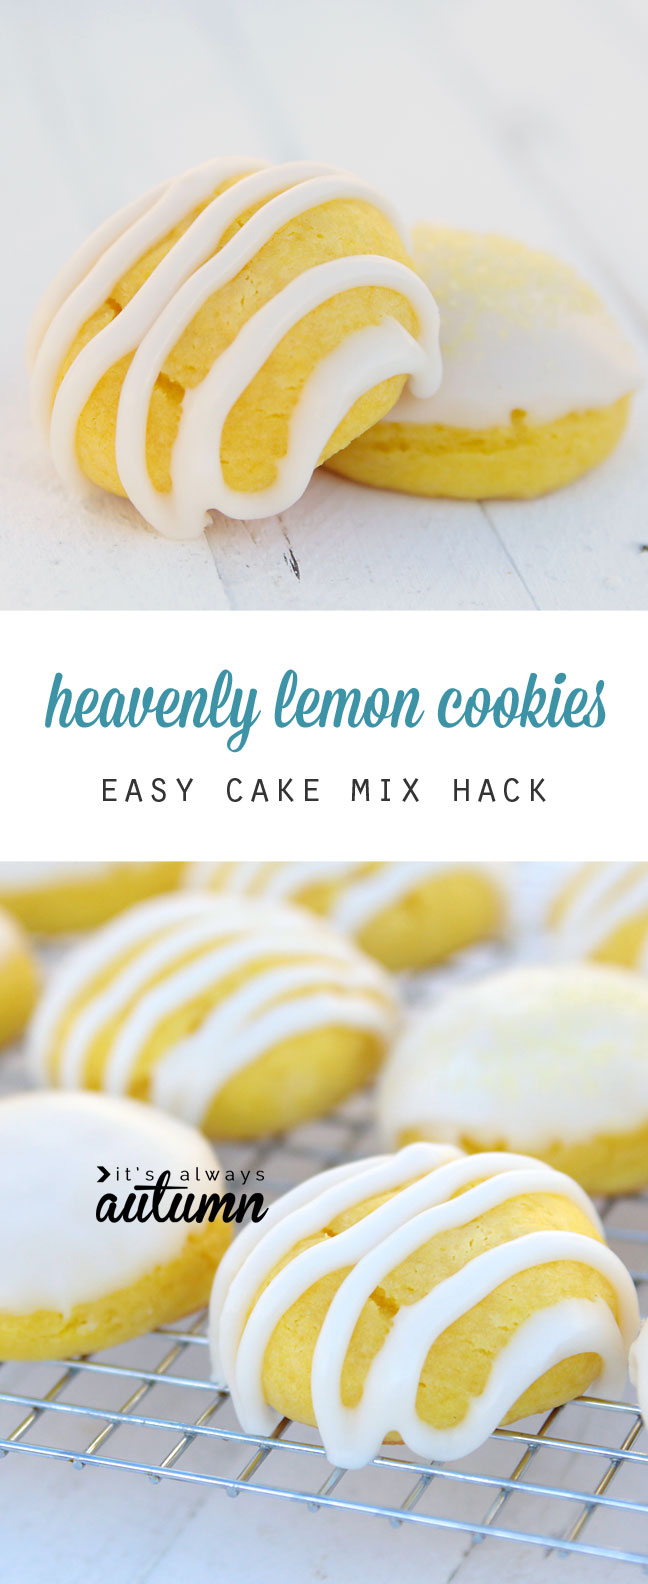 these crazy delicious lemon cookies only take a few minutes to make since they start with a cake mix